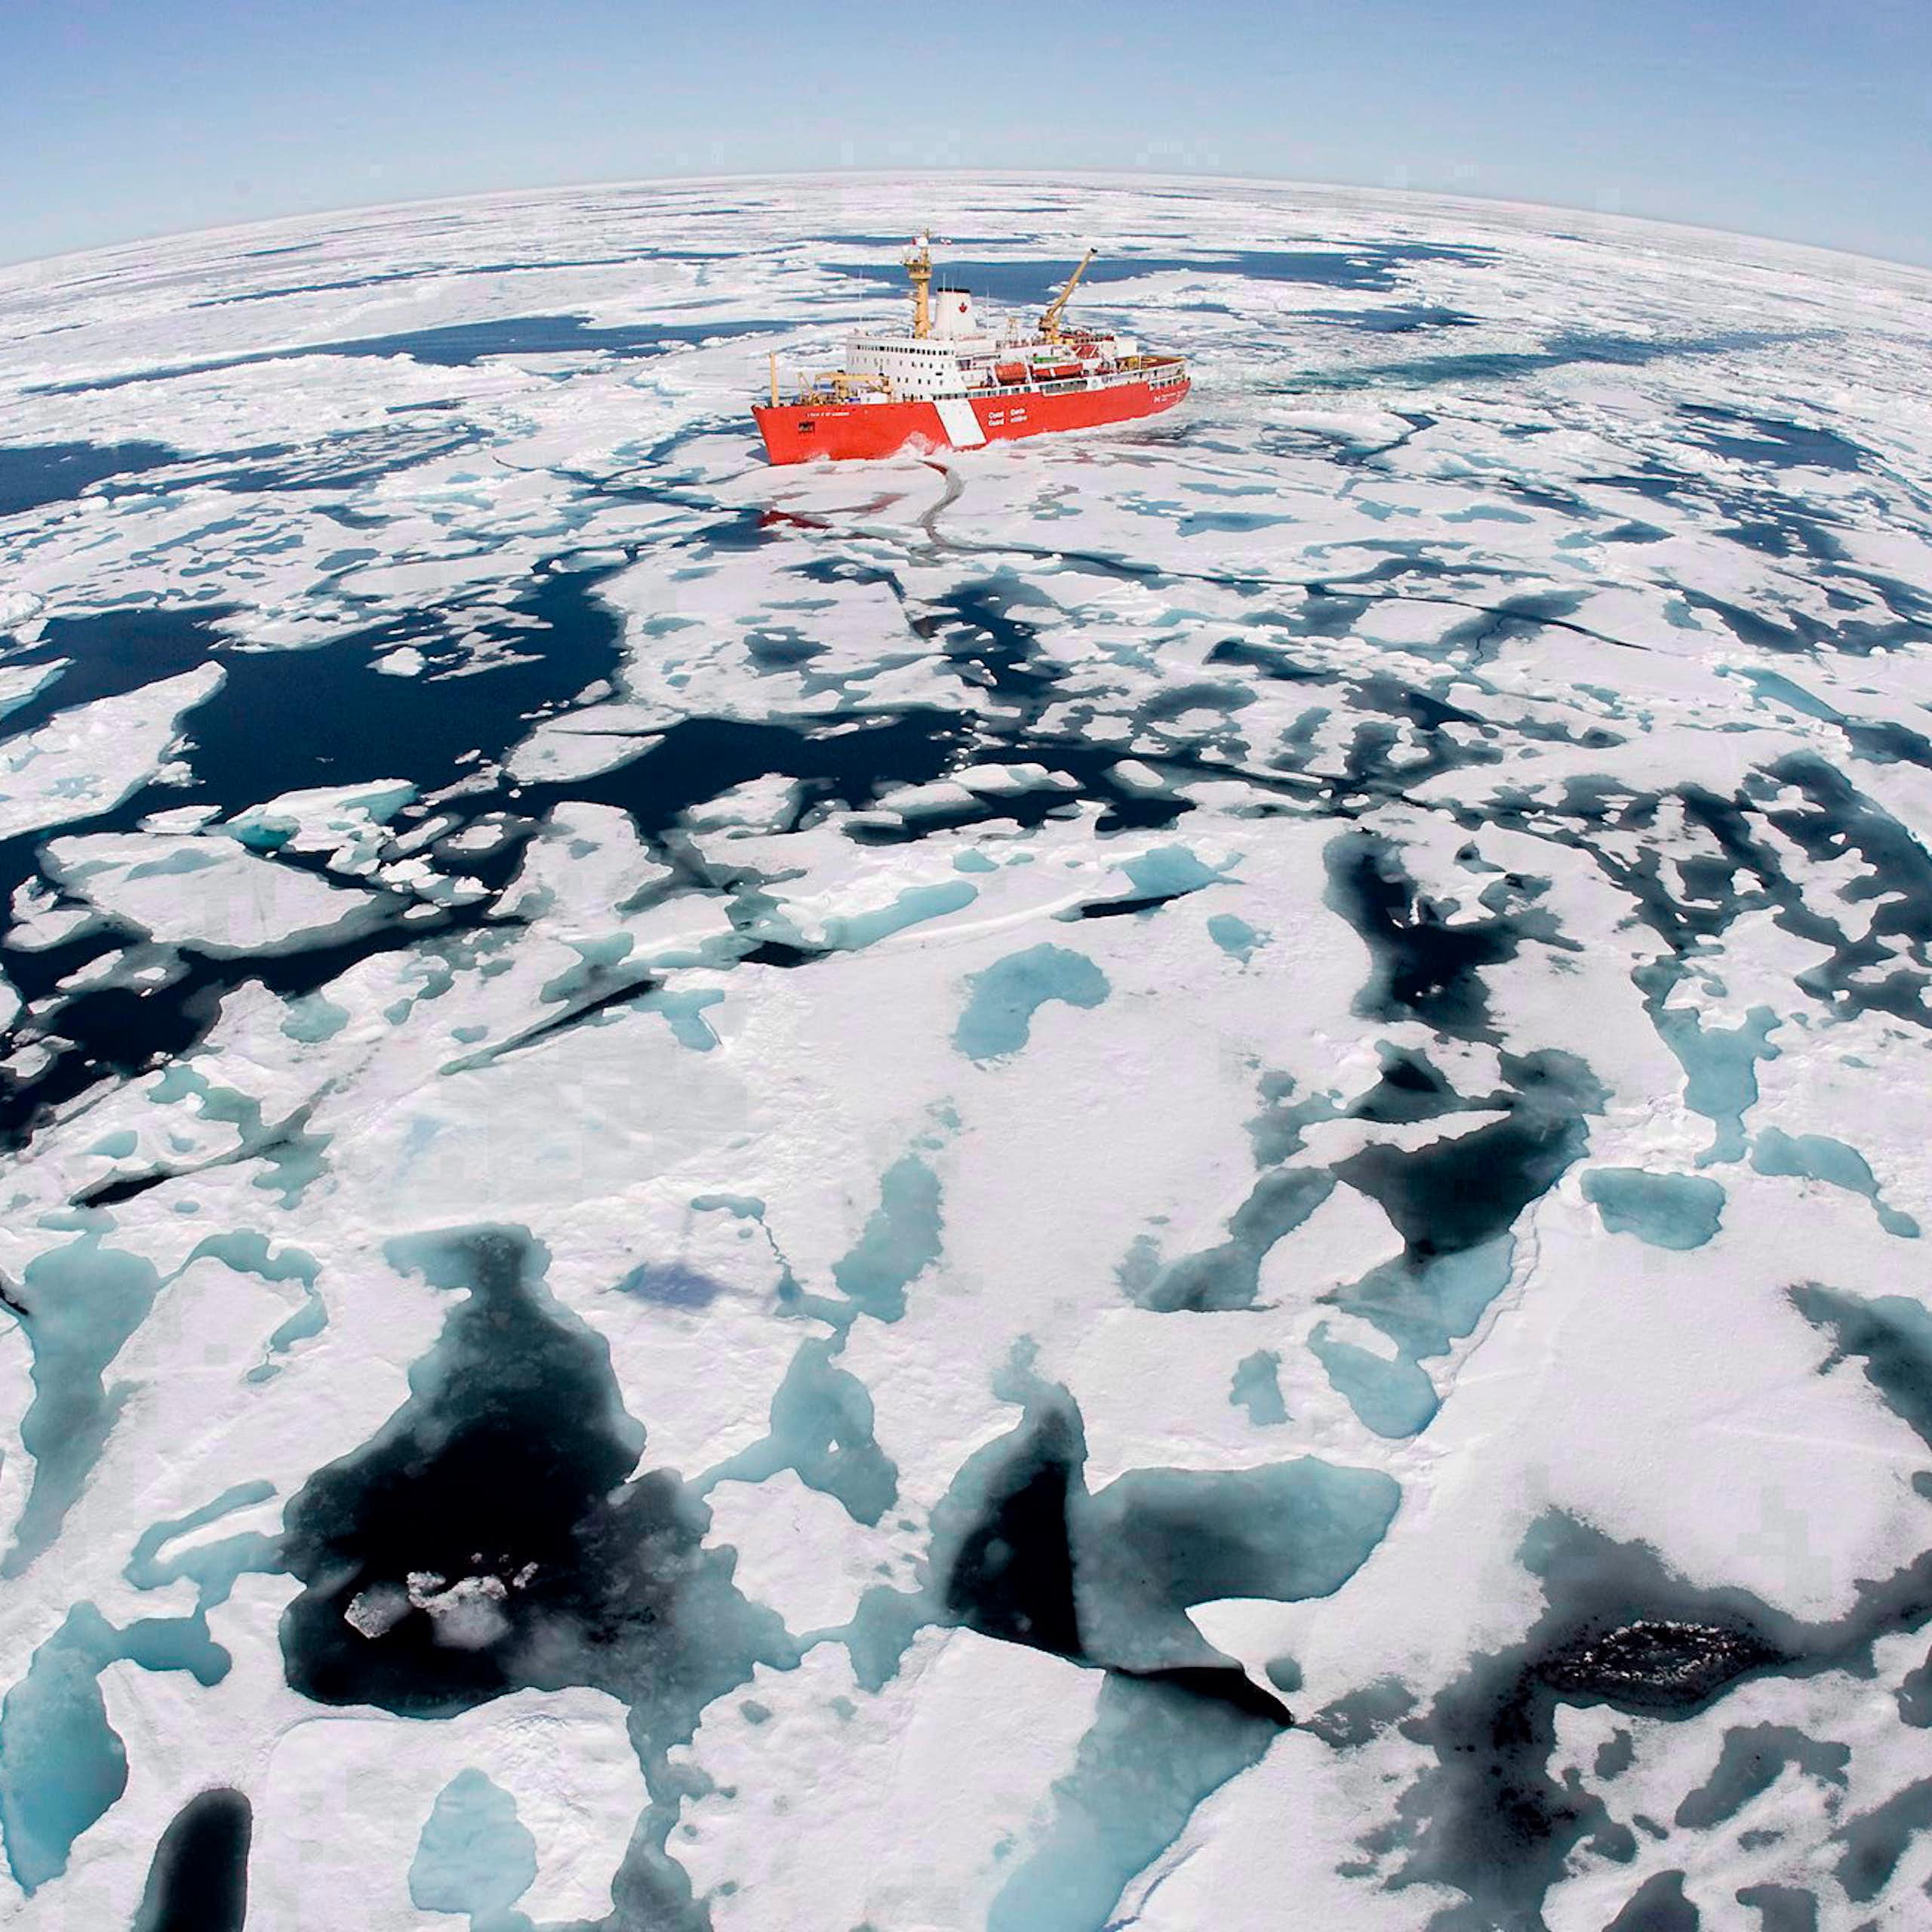 A red boat makes its way through ice-studded water.